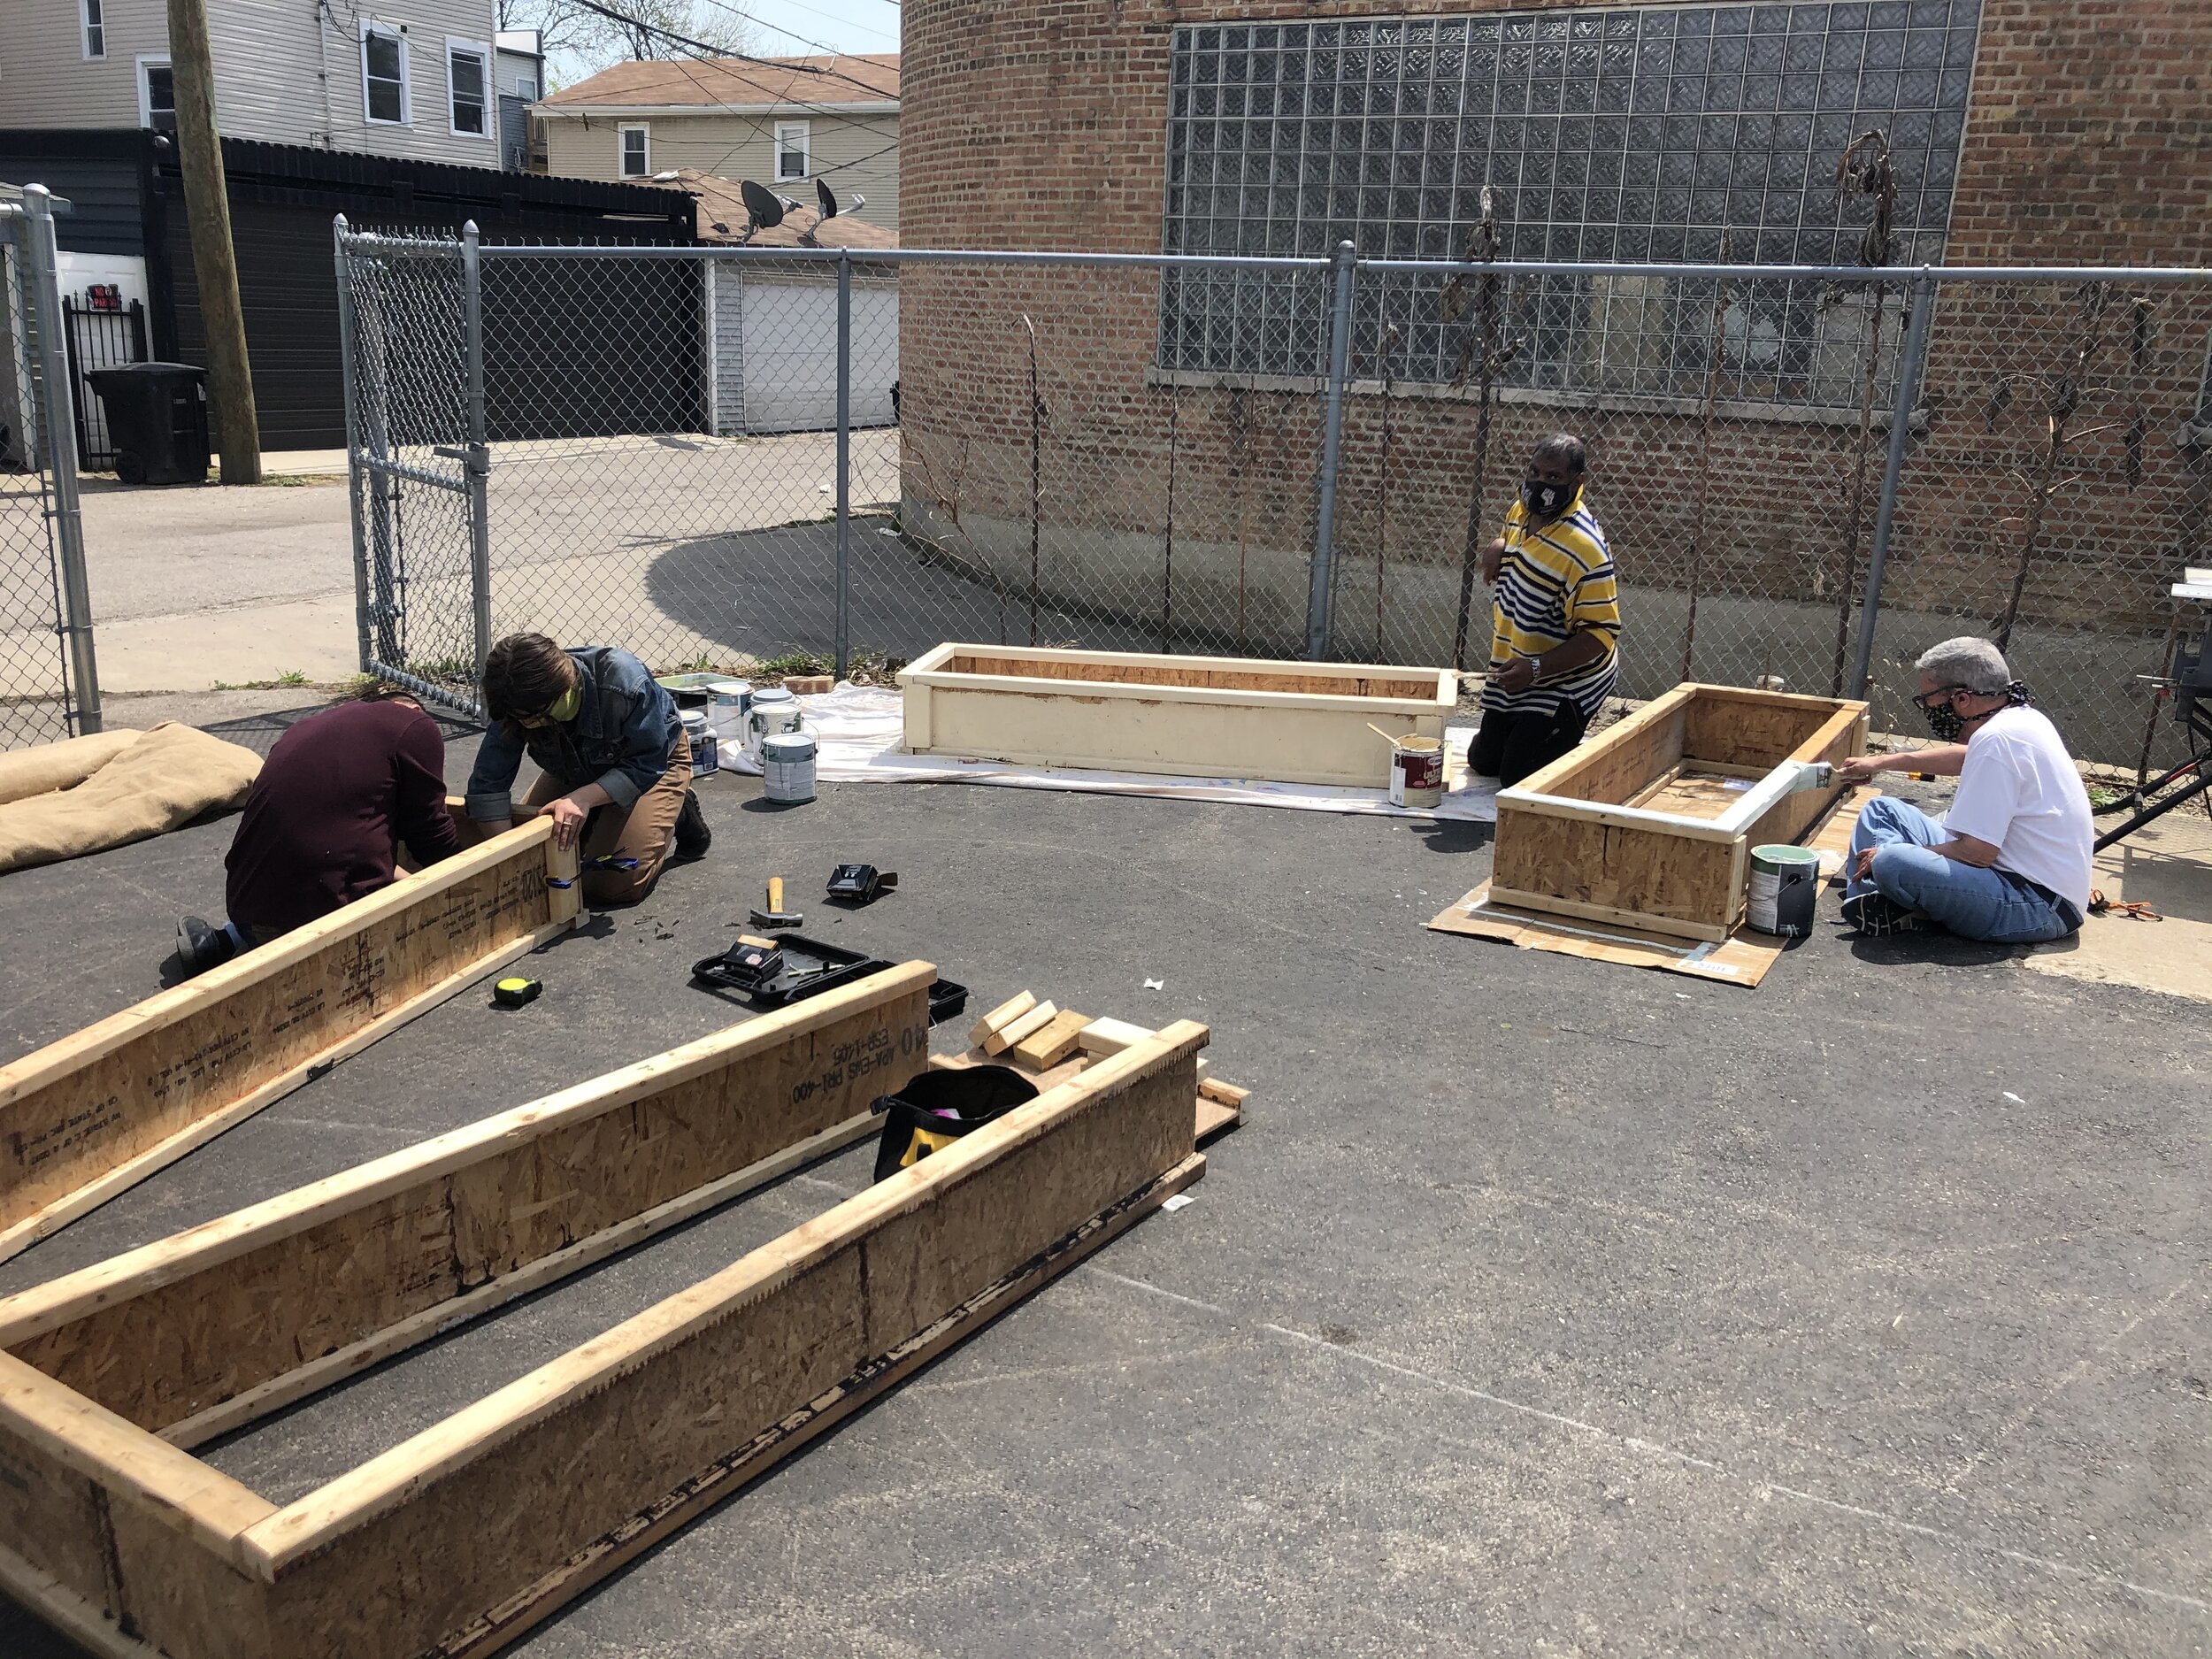  Building and painting raised beds, 2021 